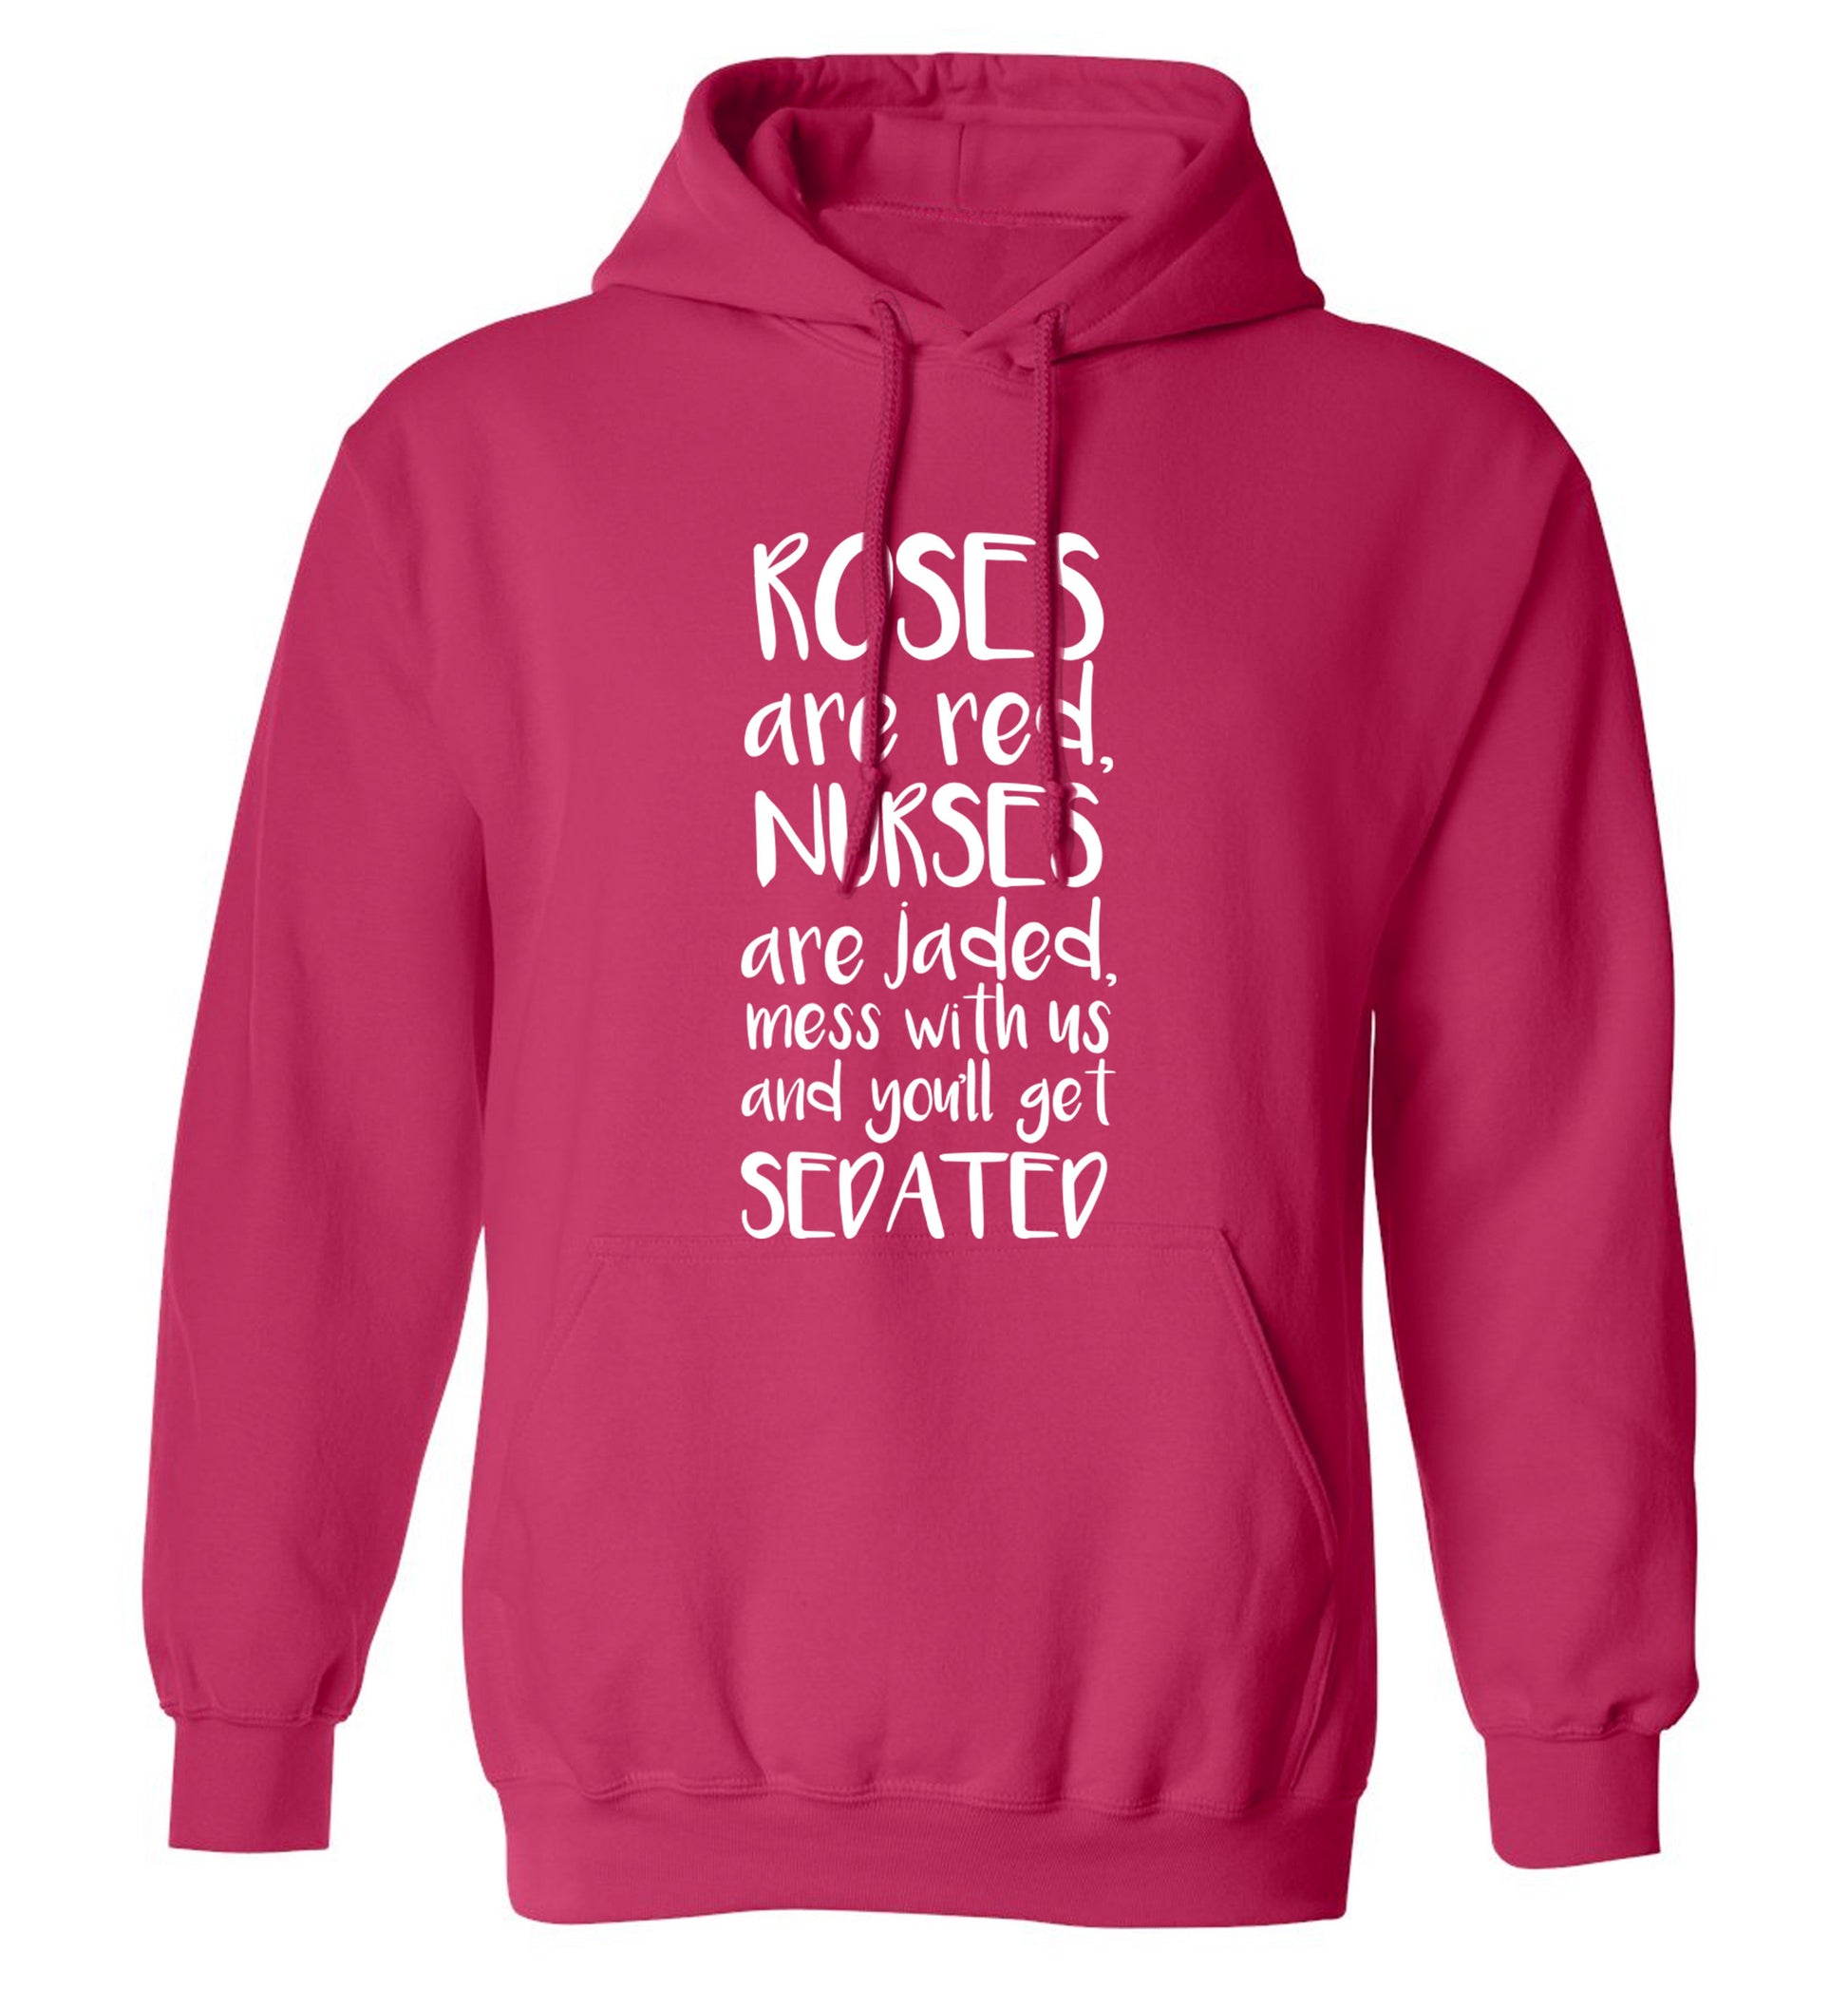 Roses are red, nurses are jaded, mess with us and you'll get sedated adults unisex pink hoodie 2XL